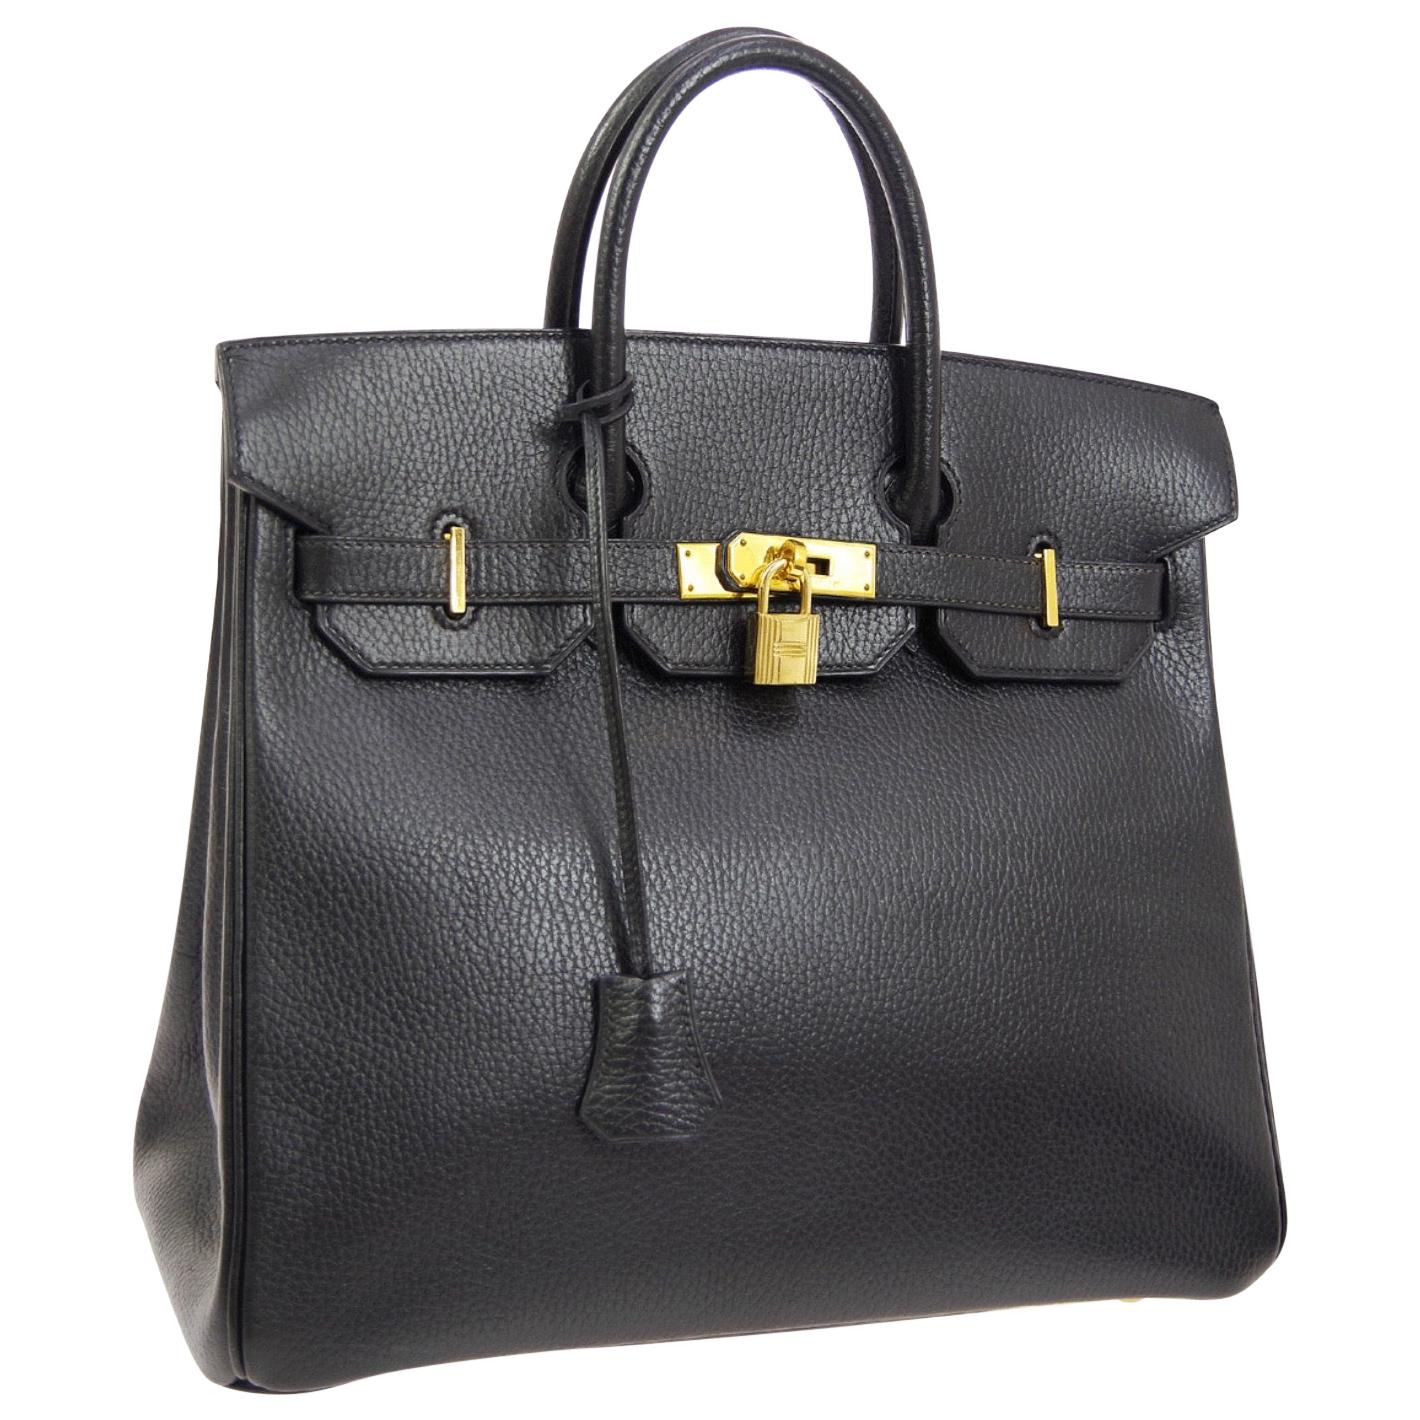 Hermes HAC 32 Black Leather Gold Carryall Travel Top Handle Tote Bag